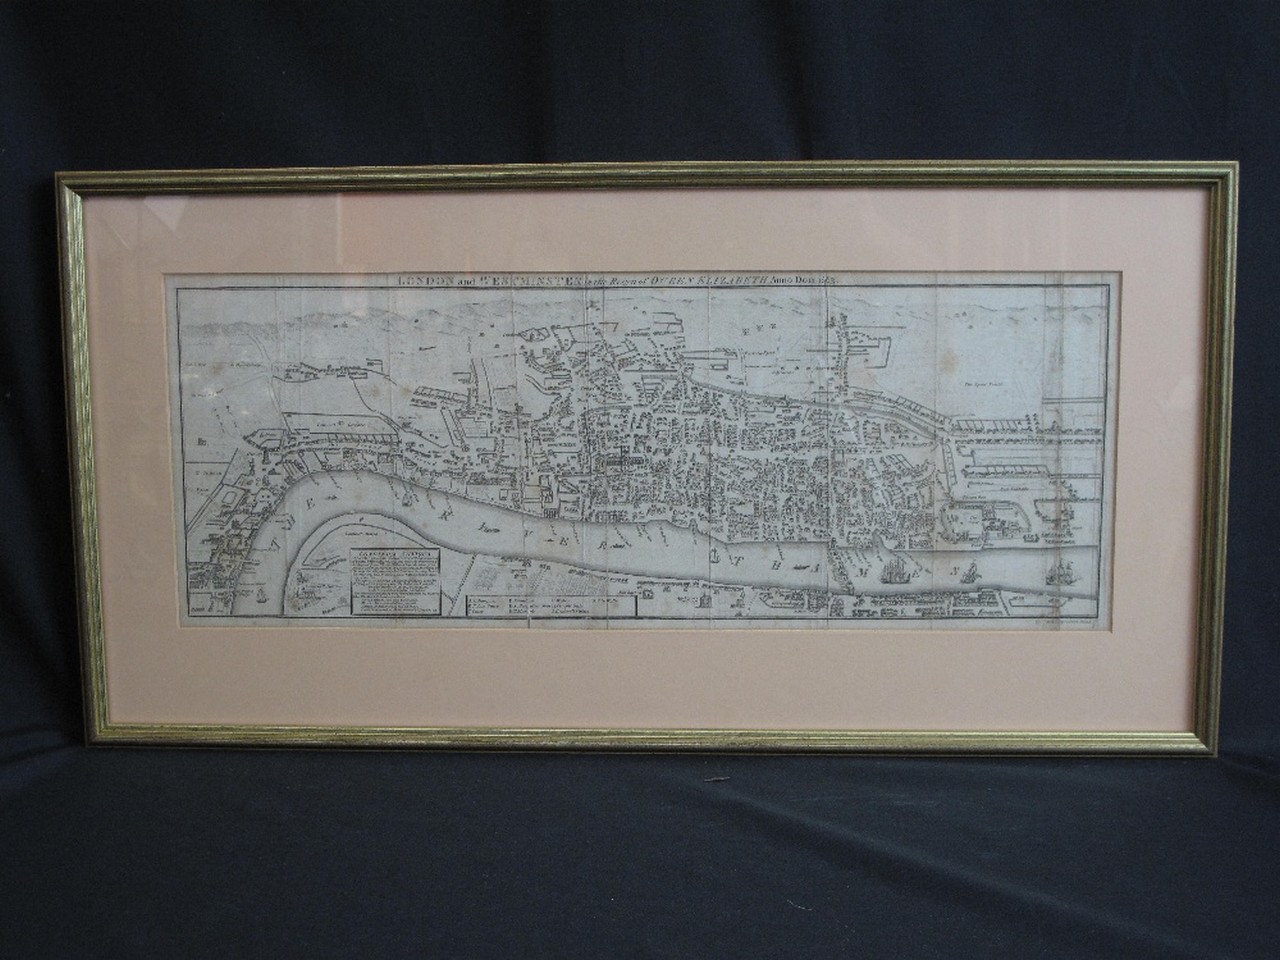 J. WALLIS (published by) ``London and Westminster in the Reign of Queen Elizabeth, Anno Dom 1563``.